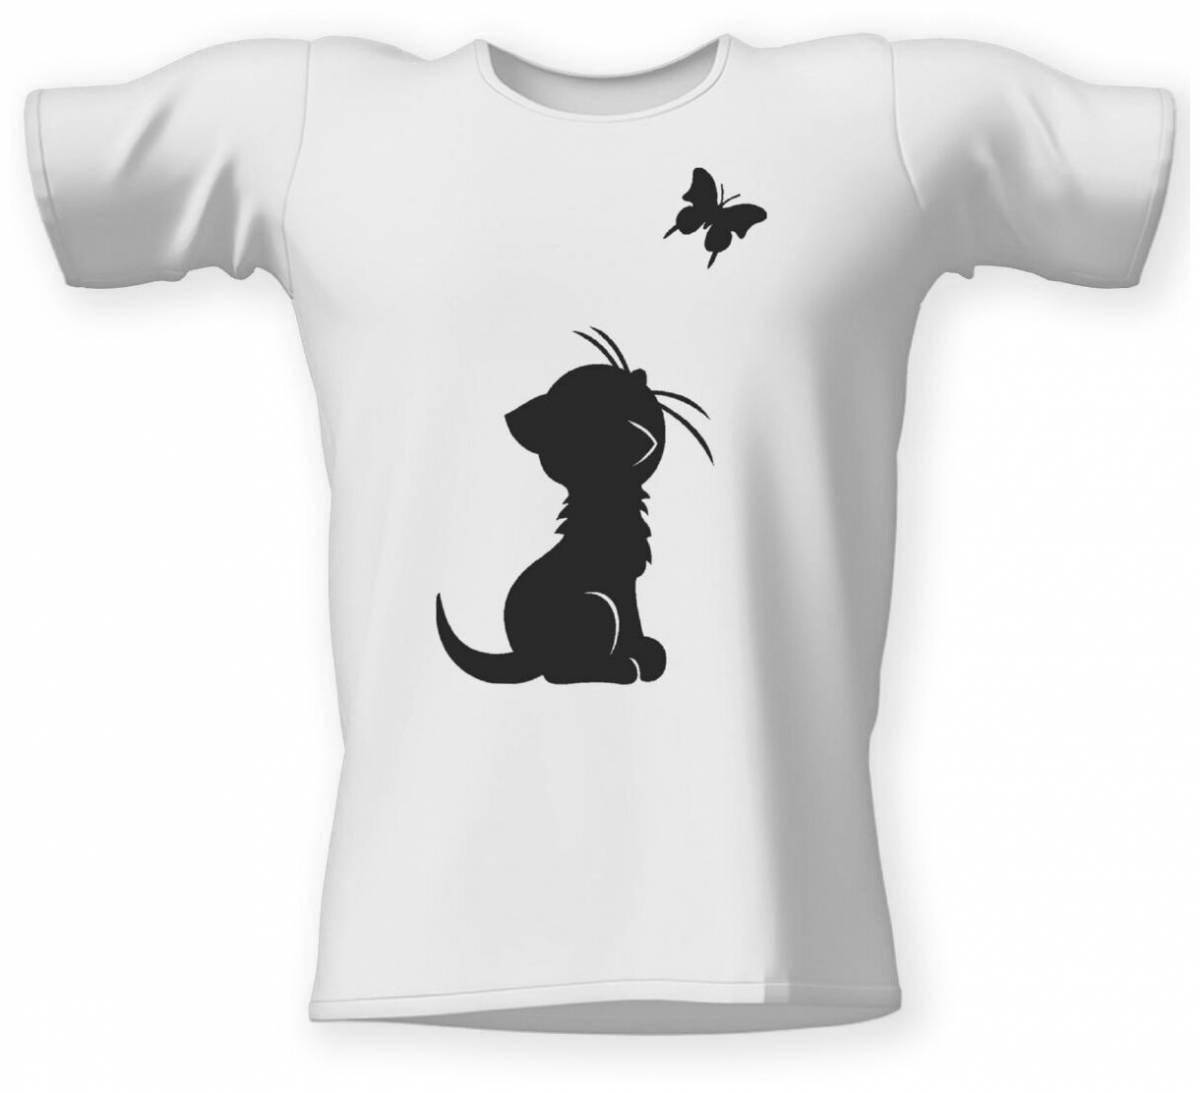 T-shirt with funny kitten coloring